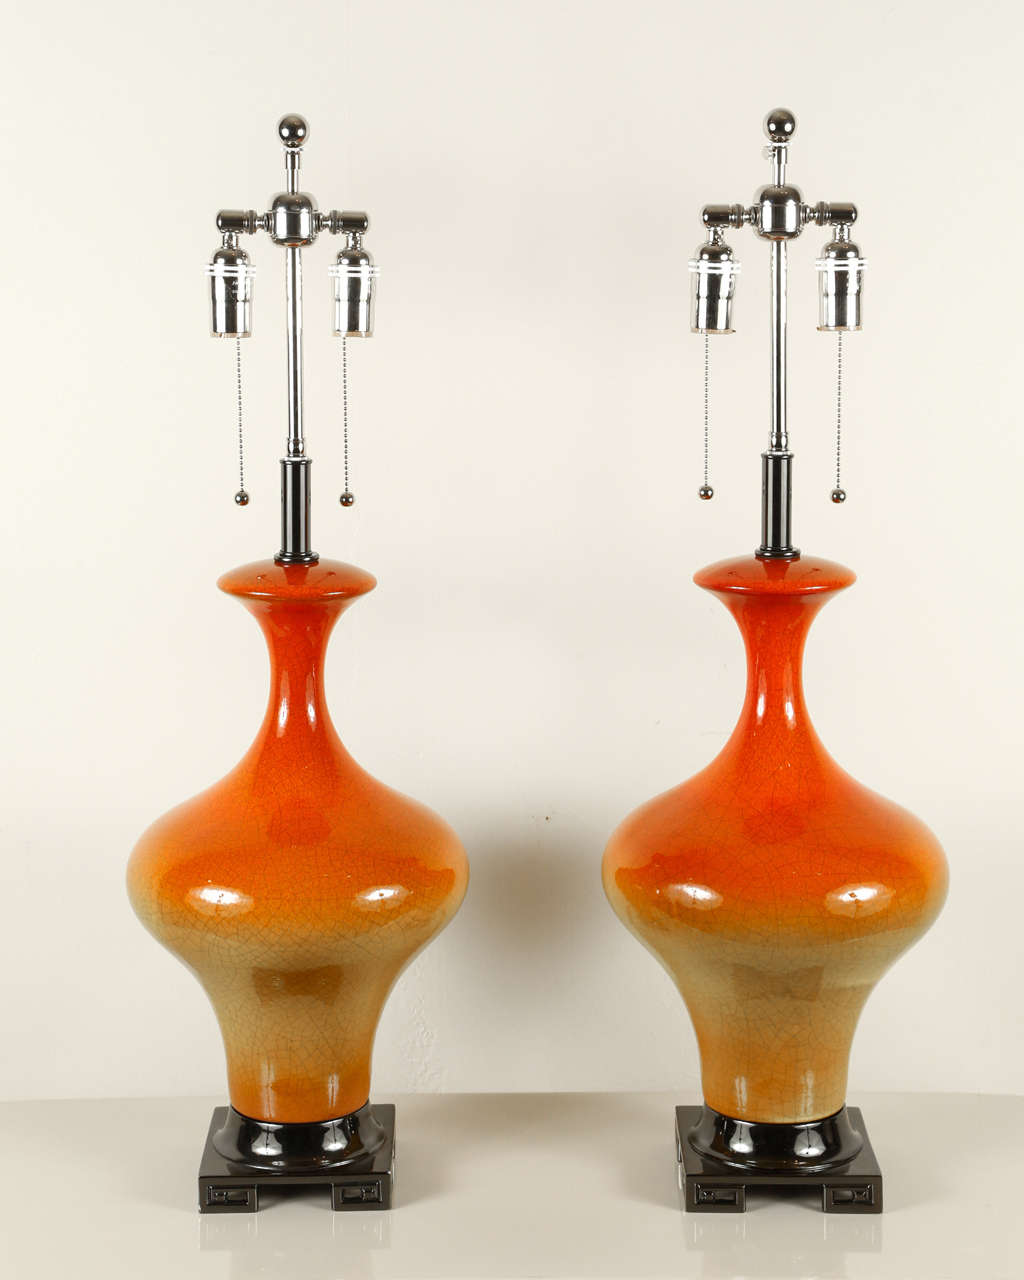 Beautiful pair of ceramic lamps with a yellow to orange ombré glaze.
The lamps are mounted on polished black nickel bases and they have been newly rewired with nickel double clusters that take standard light bulbs.
         